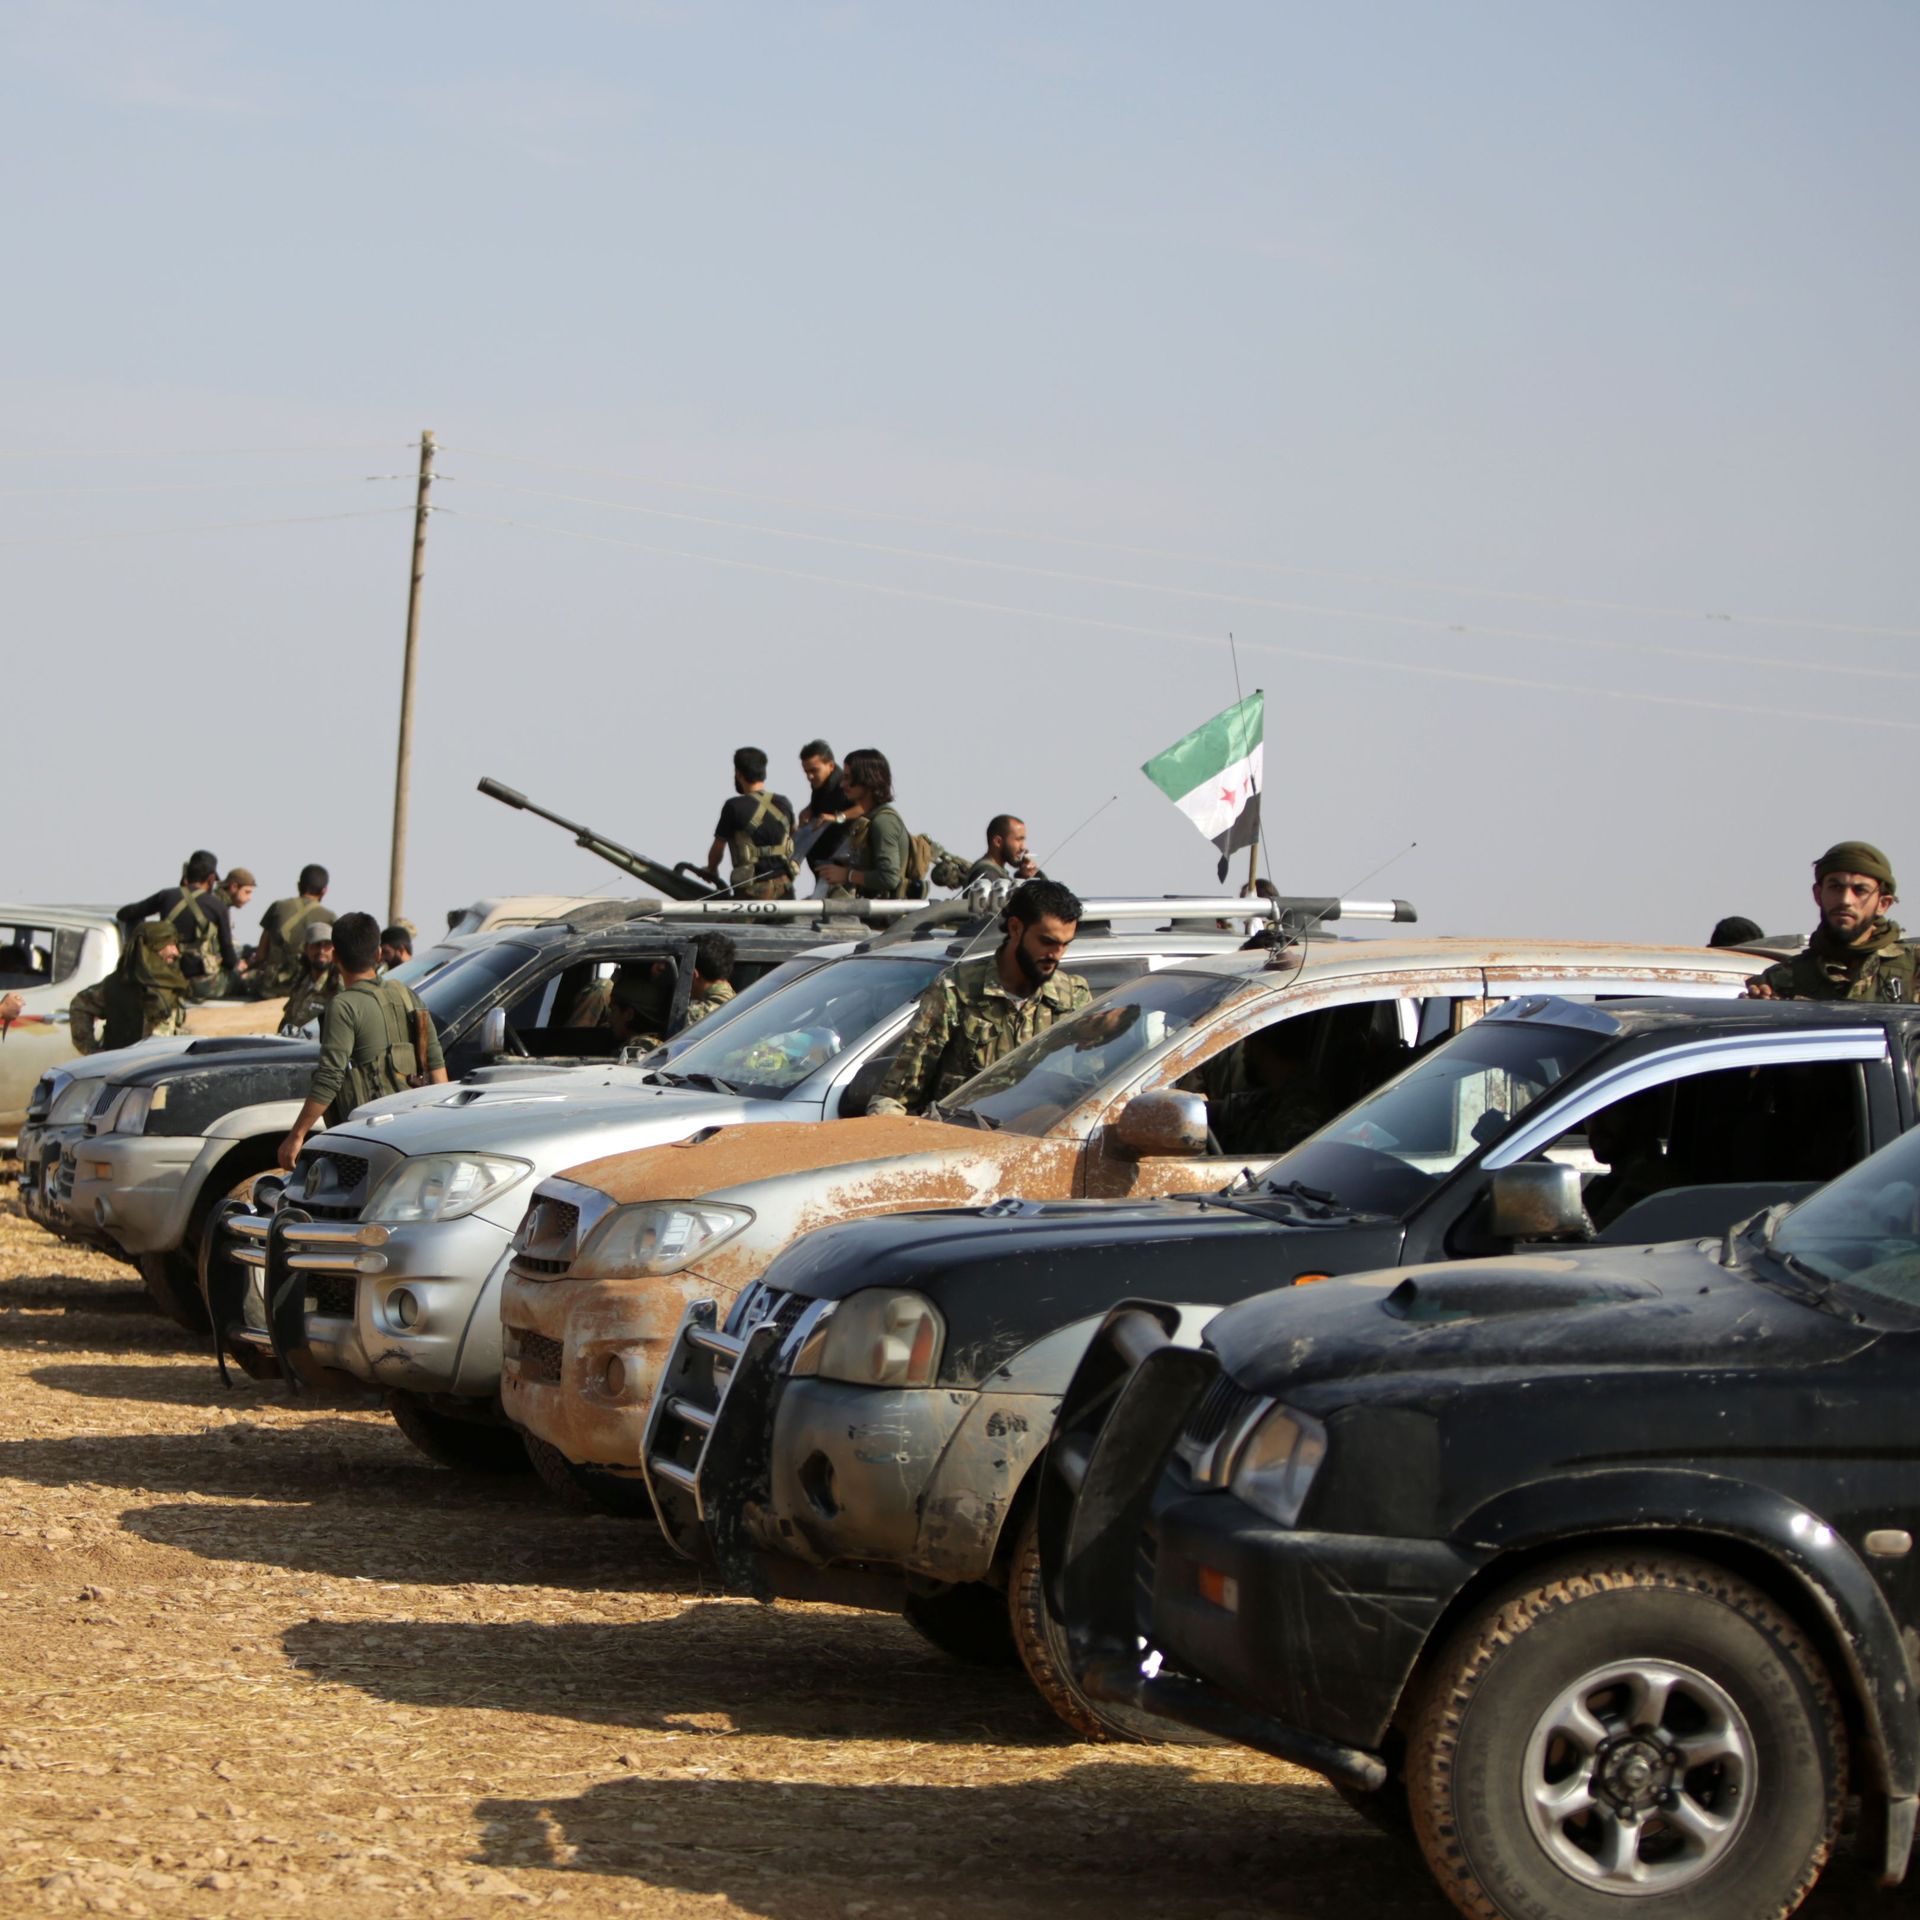 fighters in and around a small fleet of cars and trucks